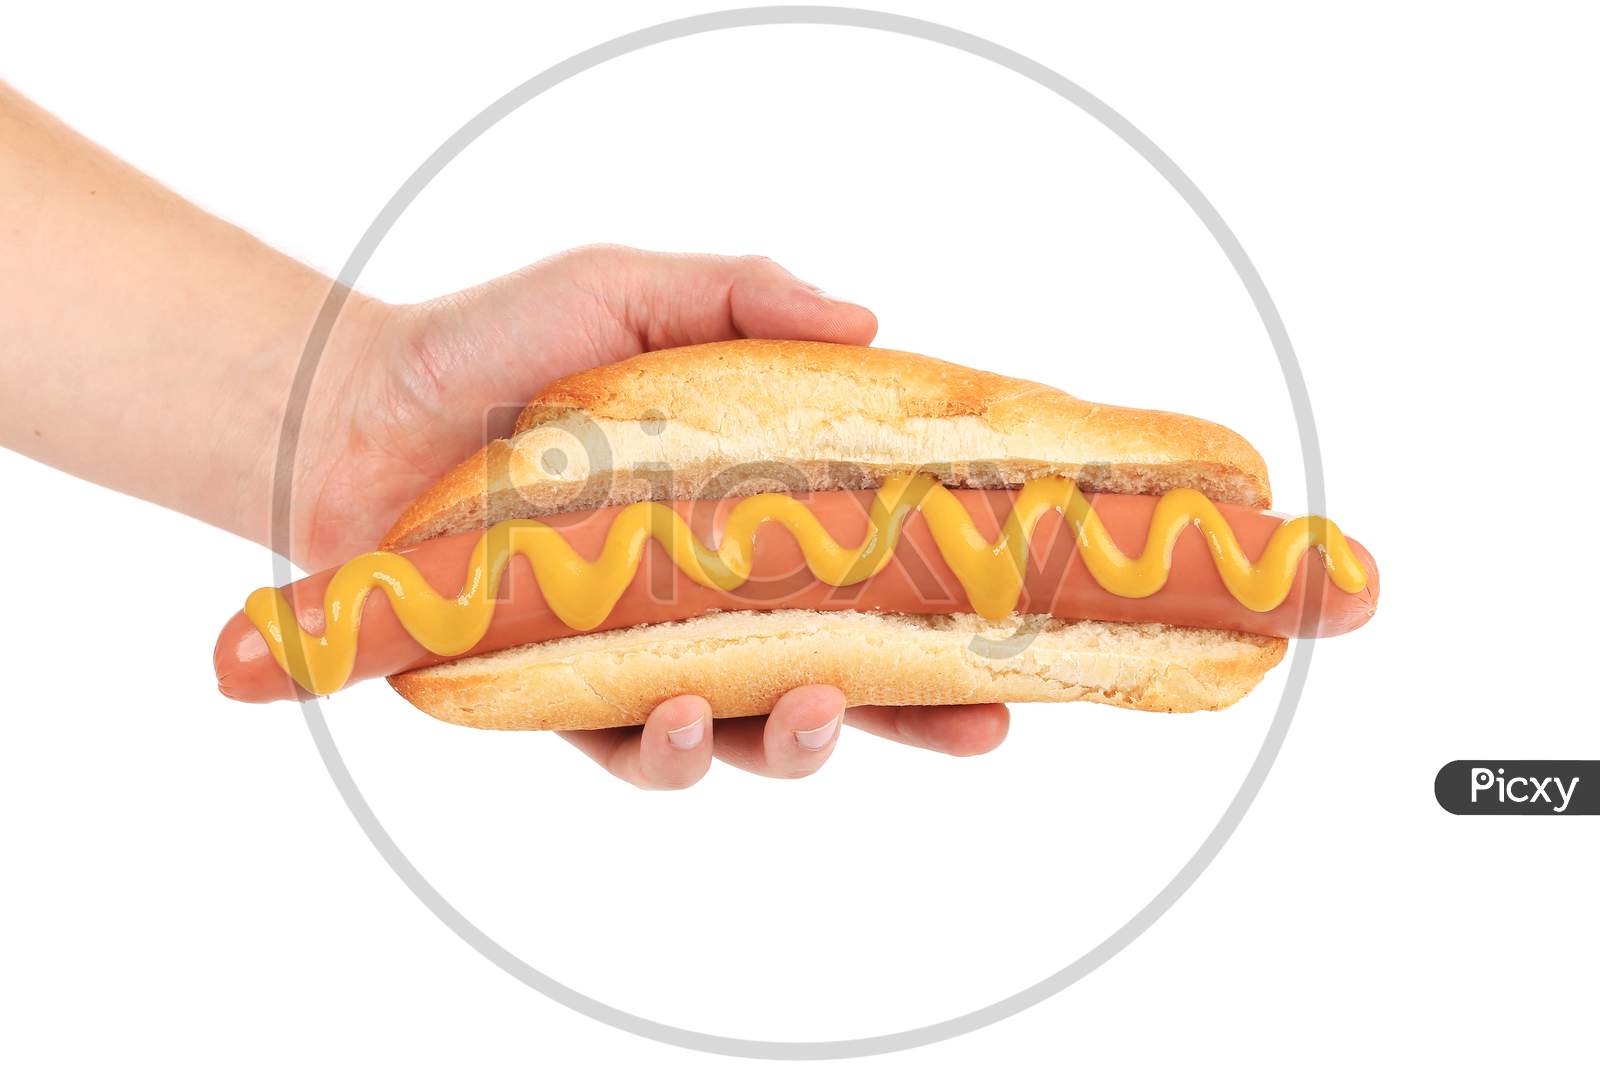 Hotdog With Mustard In Hand. Isolated On A White Background.